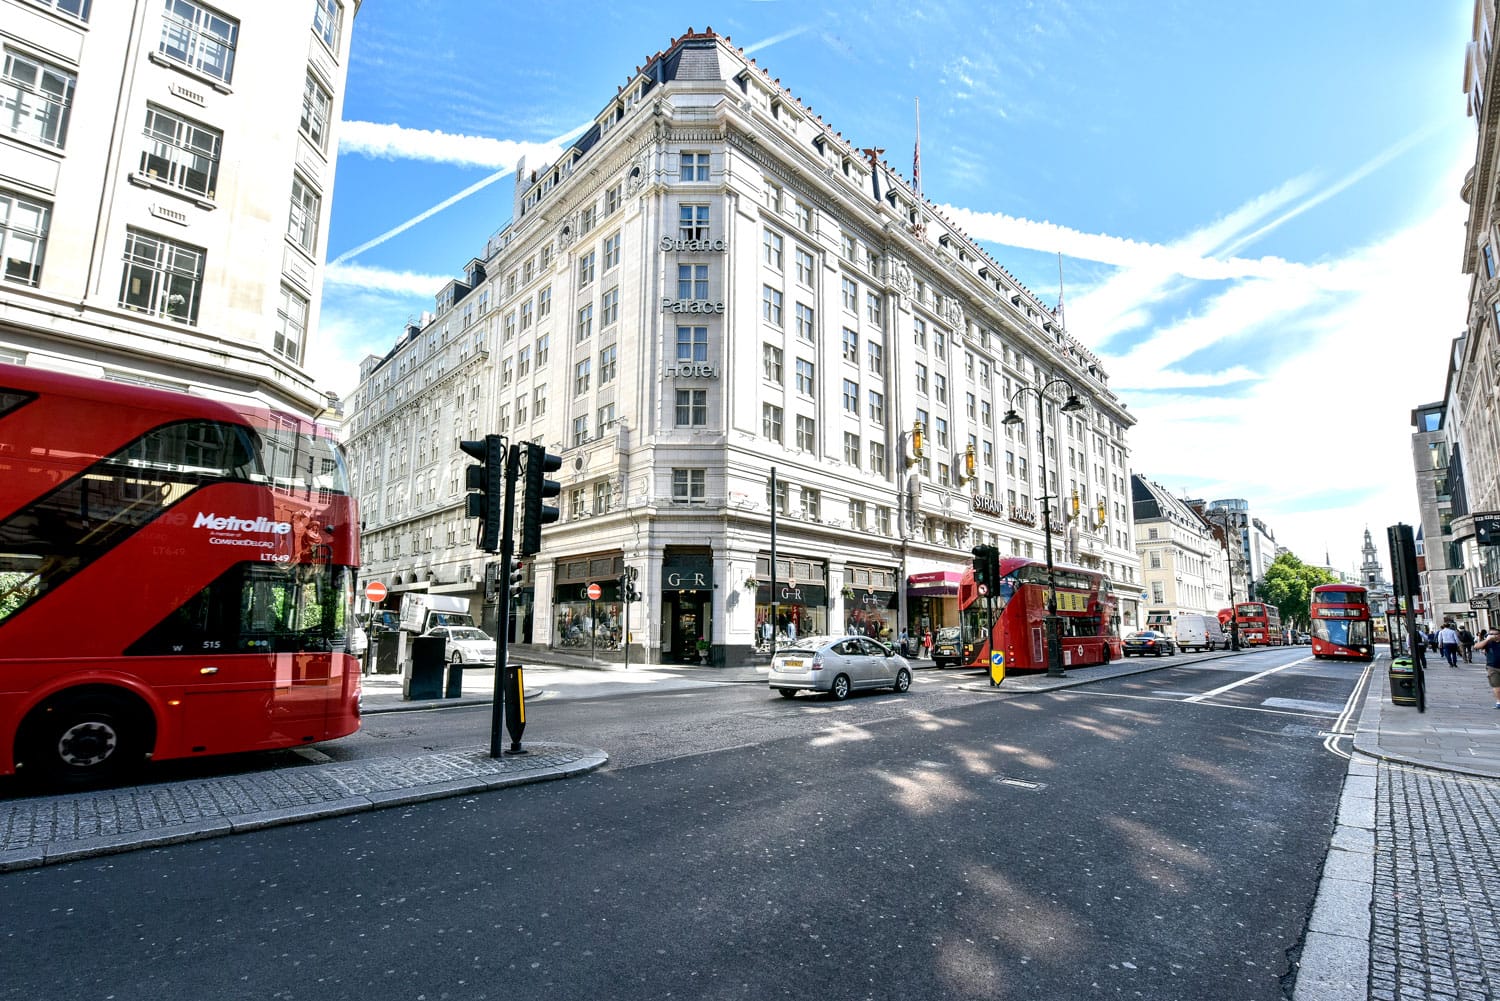 Strand Palace Appoints ANM Communications Retained Global Agency